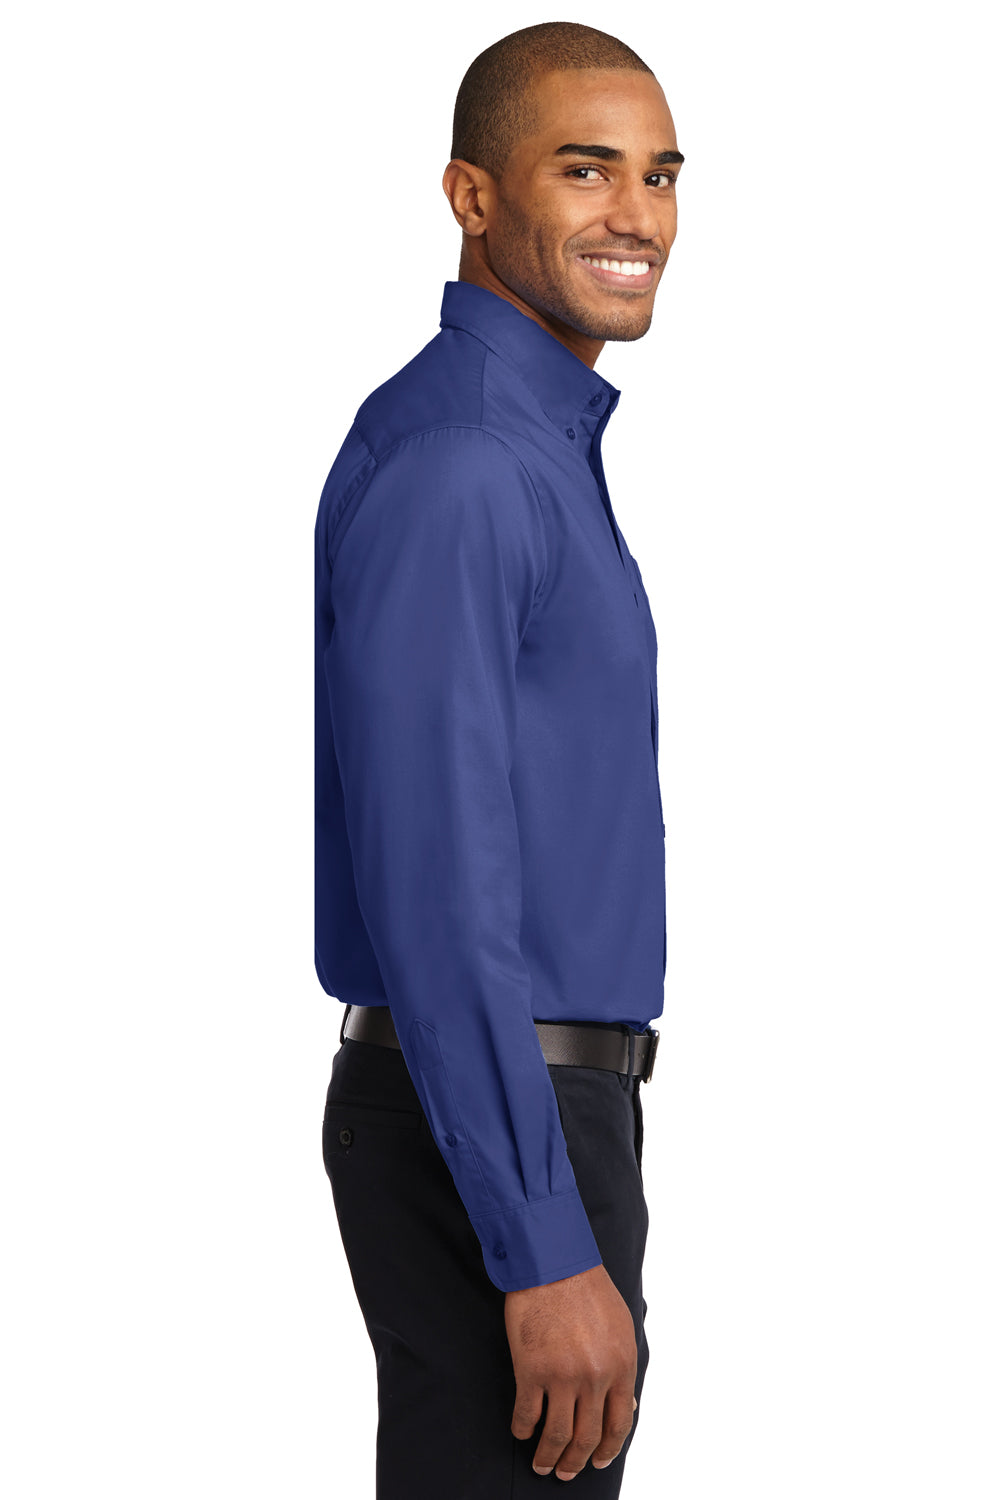 Port Authority S608/TLS608/S608ES Mens Easy Care Wrinkle Resistant Long Sleeve Button Down Shirt w/ Pocket Mediterranean Blue Side